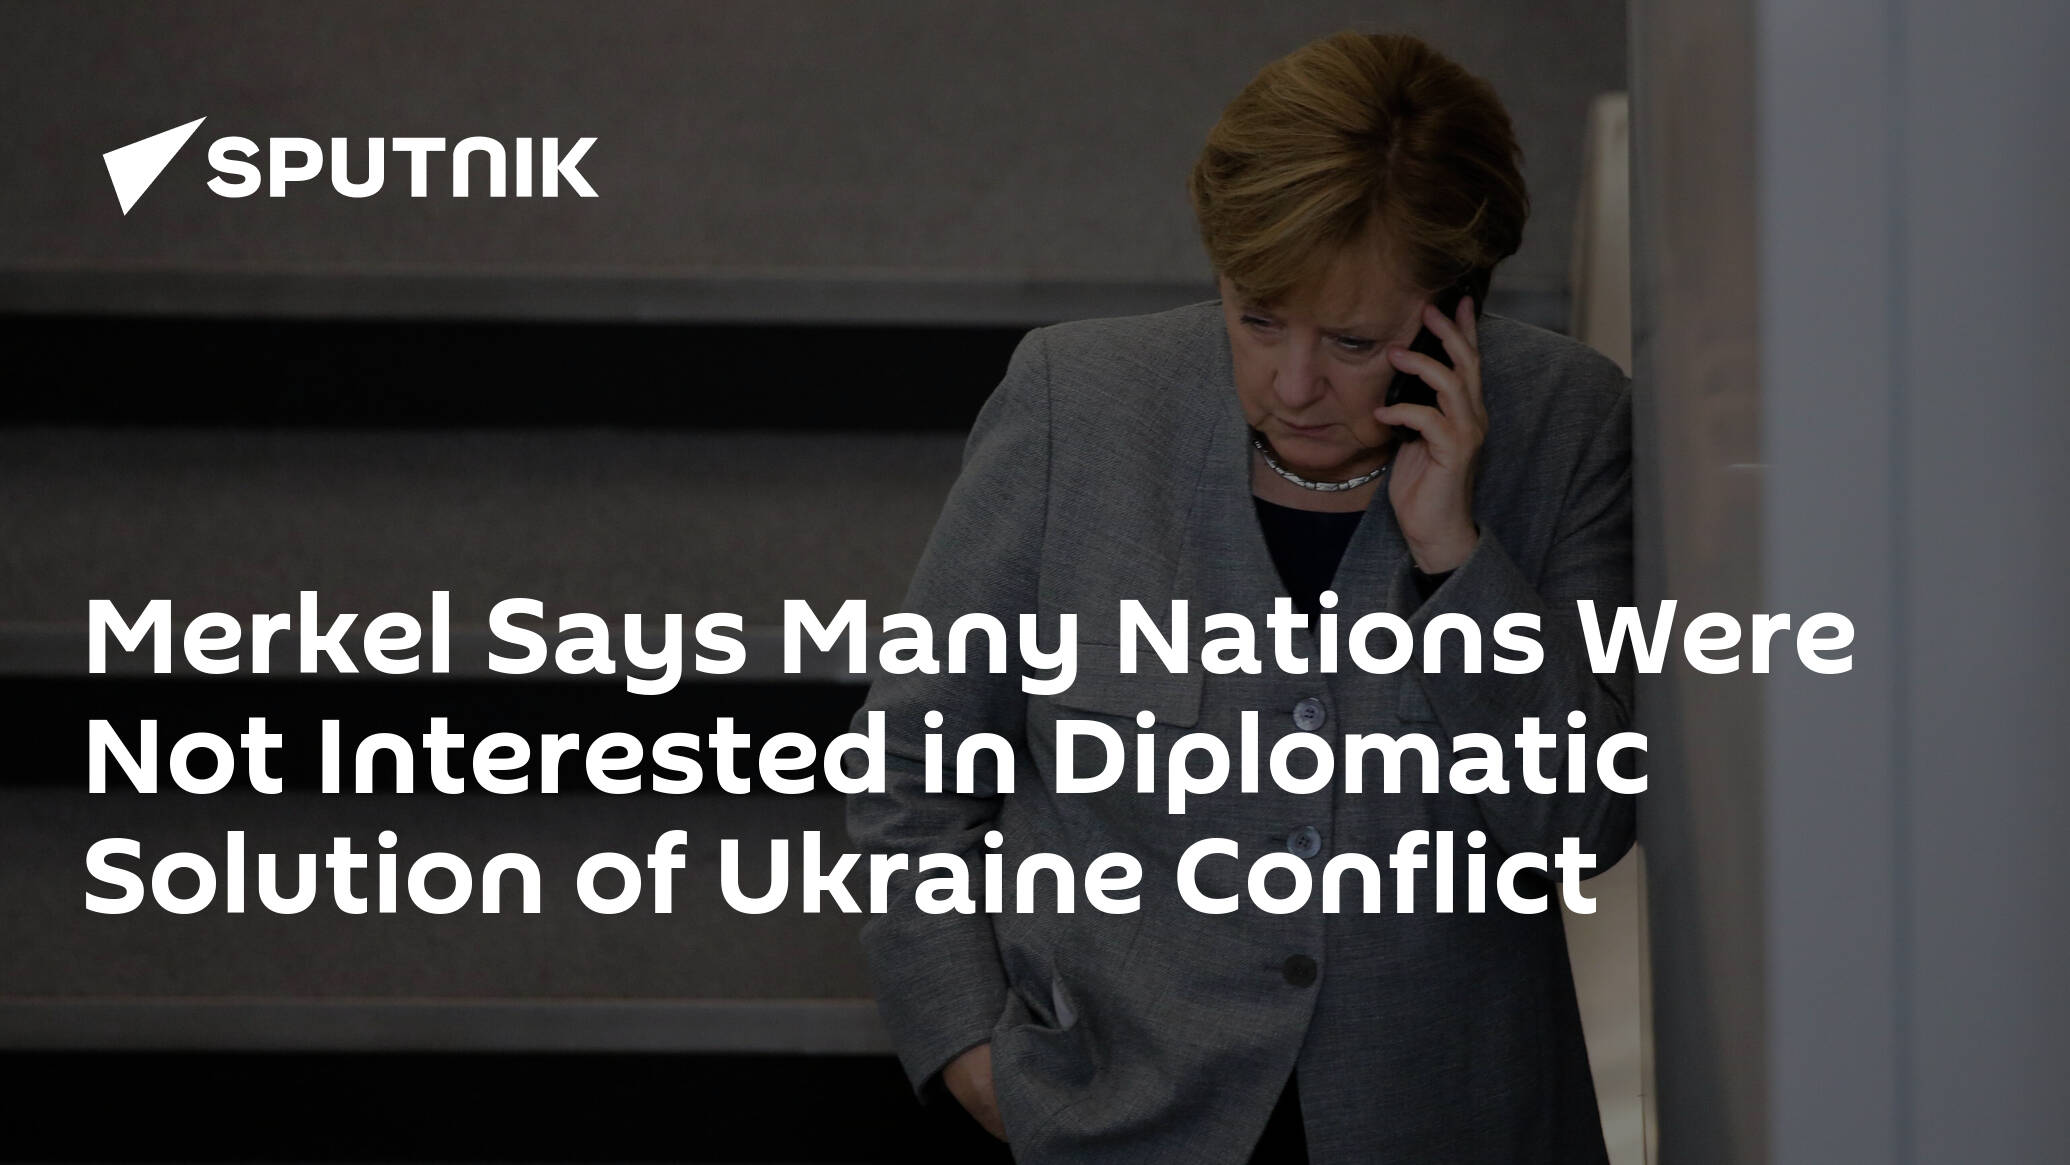 Merkel Says Many Nations Were Not Interested in Diplomatic Solution of Ukraine Conflict